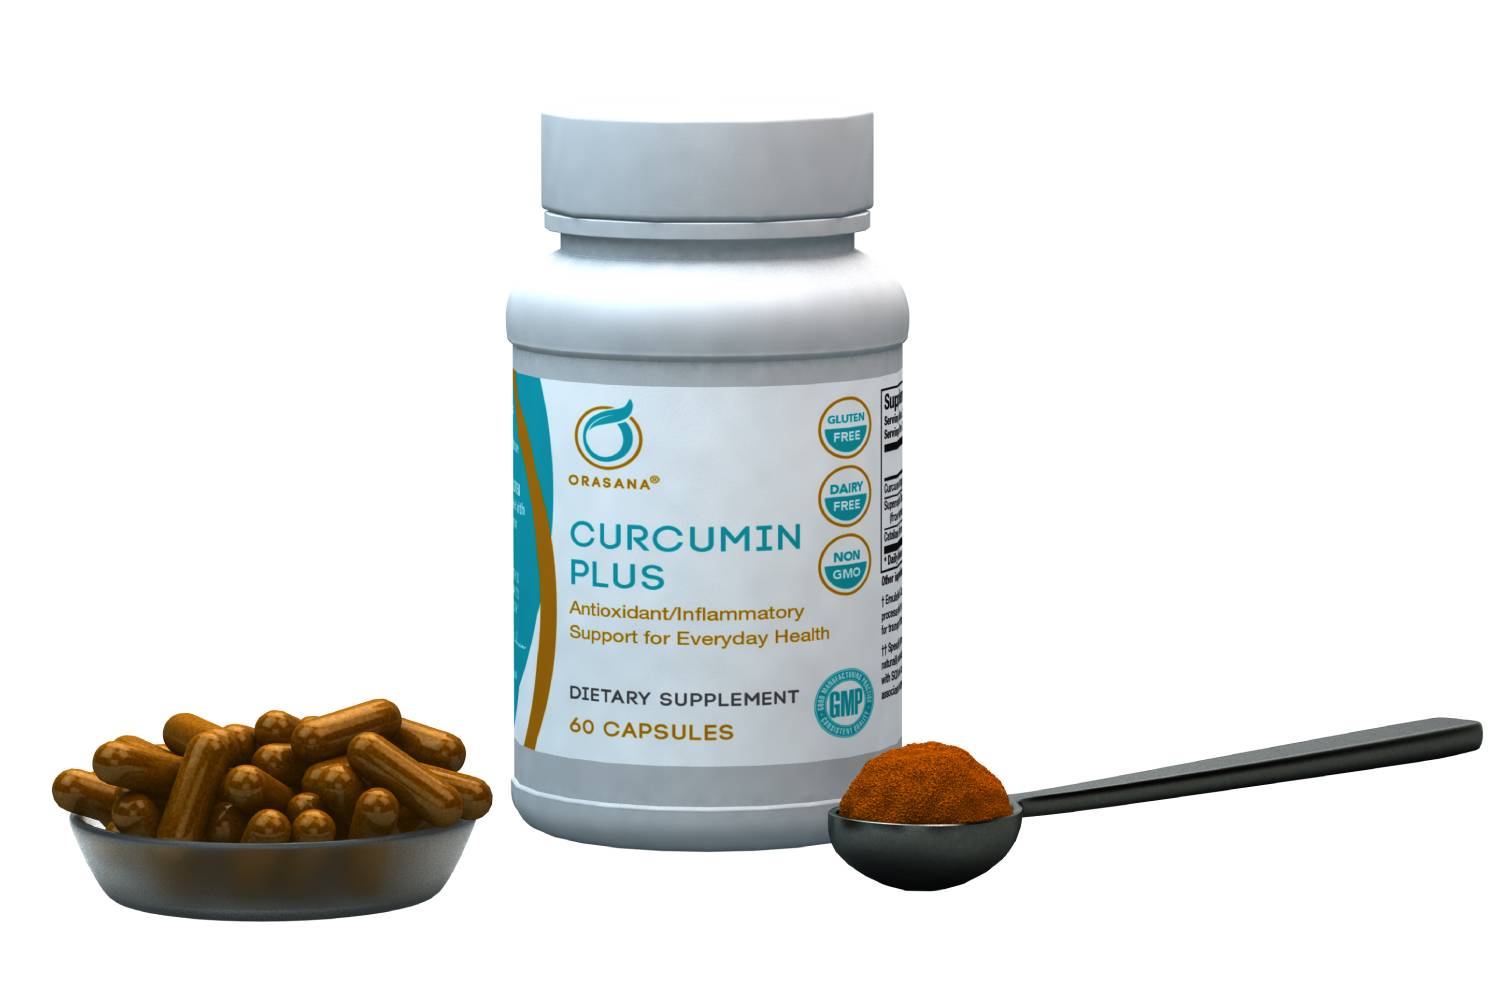 2023 Best curcumin Plus that is great for arthritis, inflammation, as well as improves depression, brain health, and used for cancer prevention.